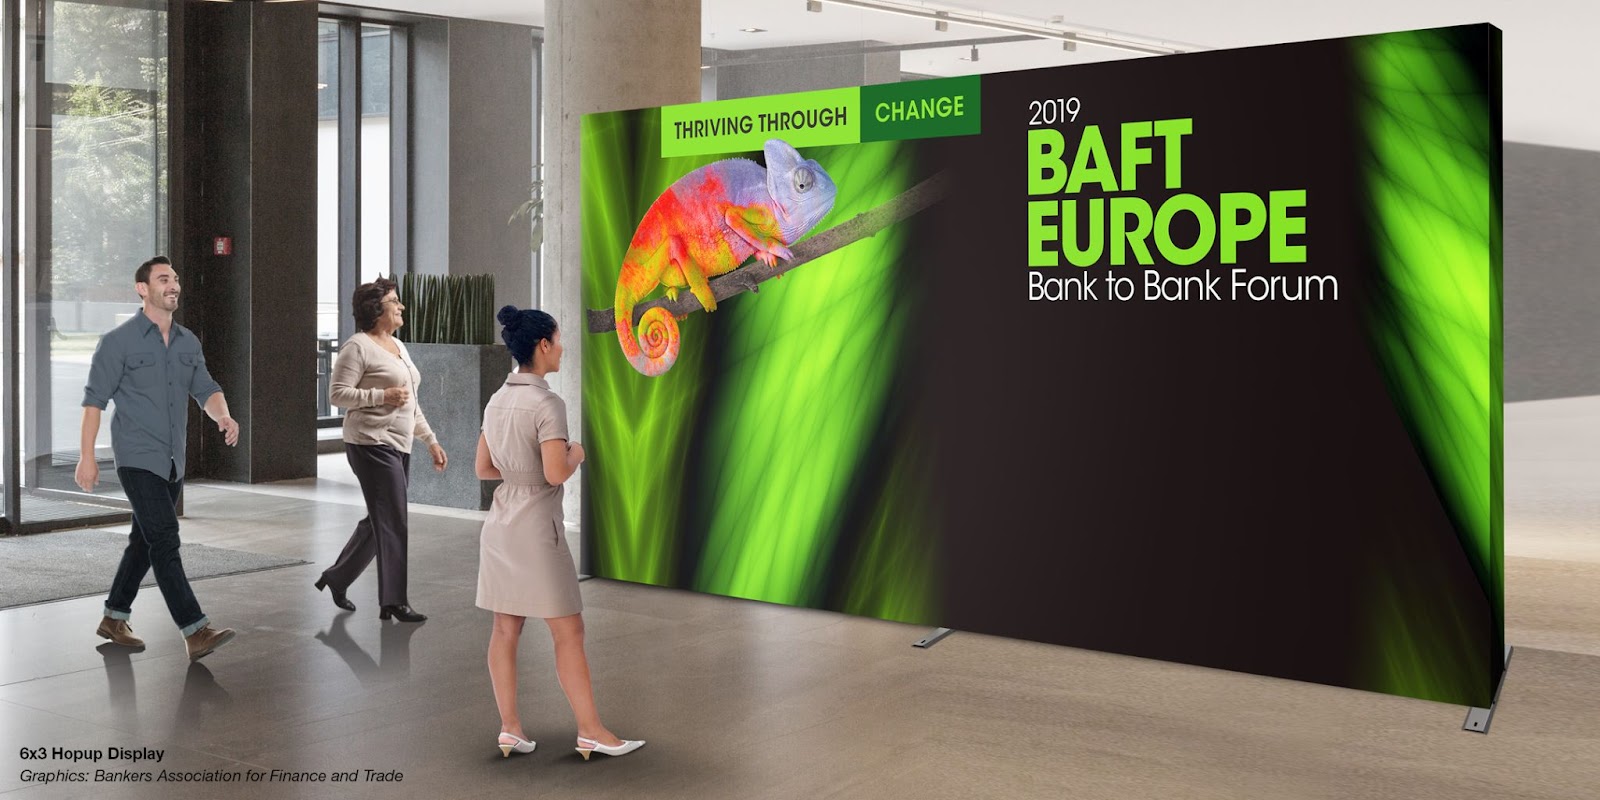 A Large backdrop shows the BAFT Europe 2019 artwork of a chameleon scaling a bright green leaf against a black background